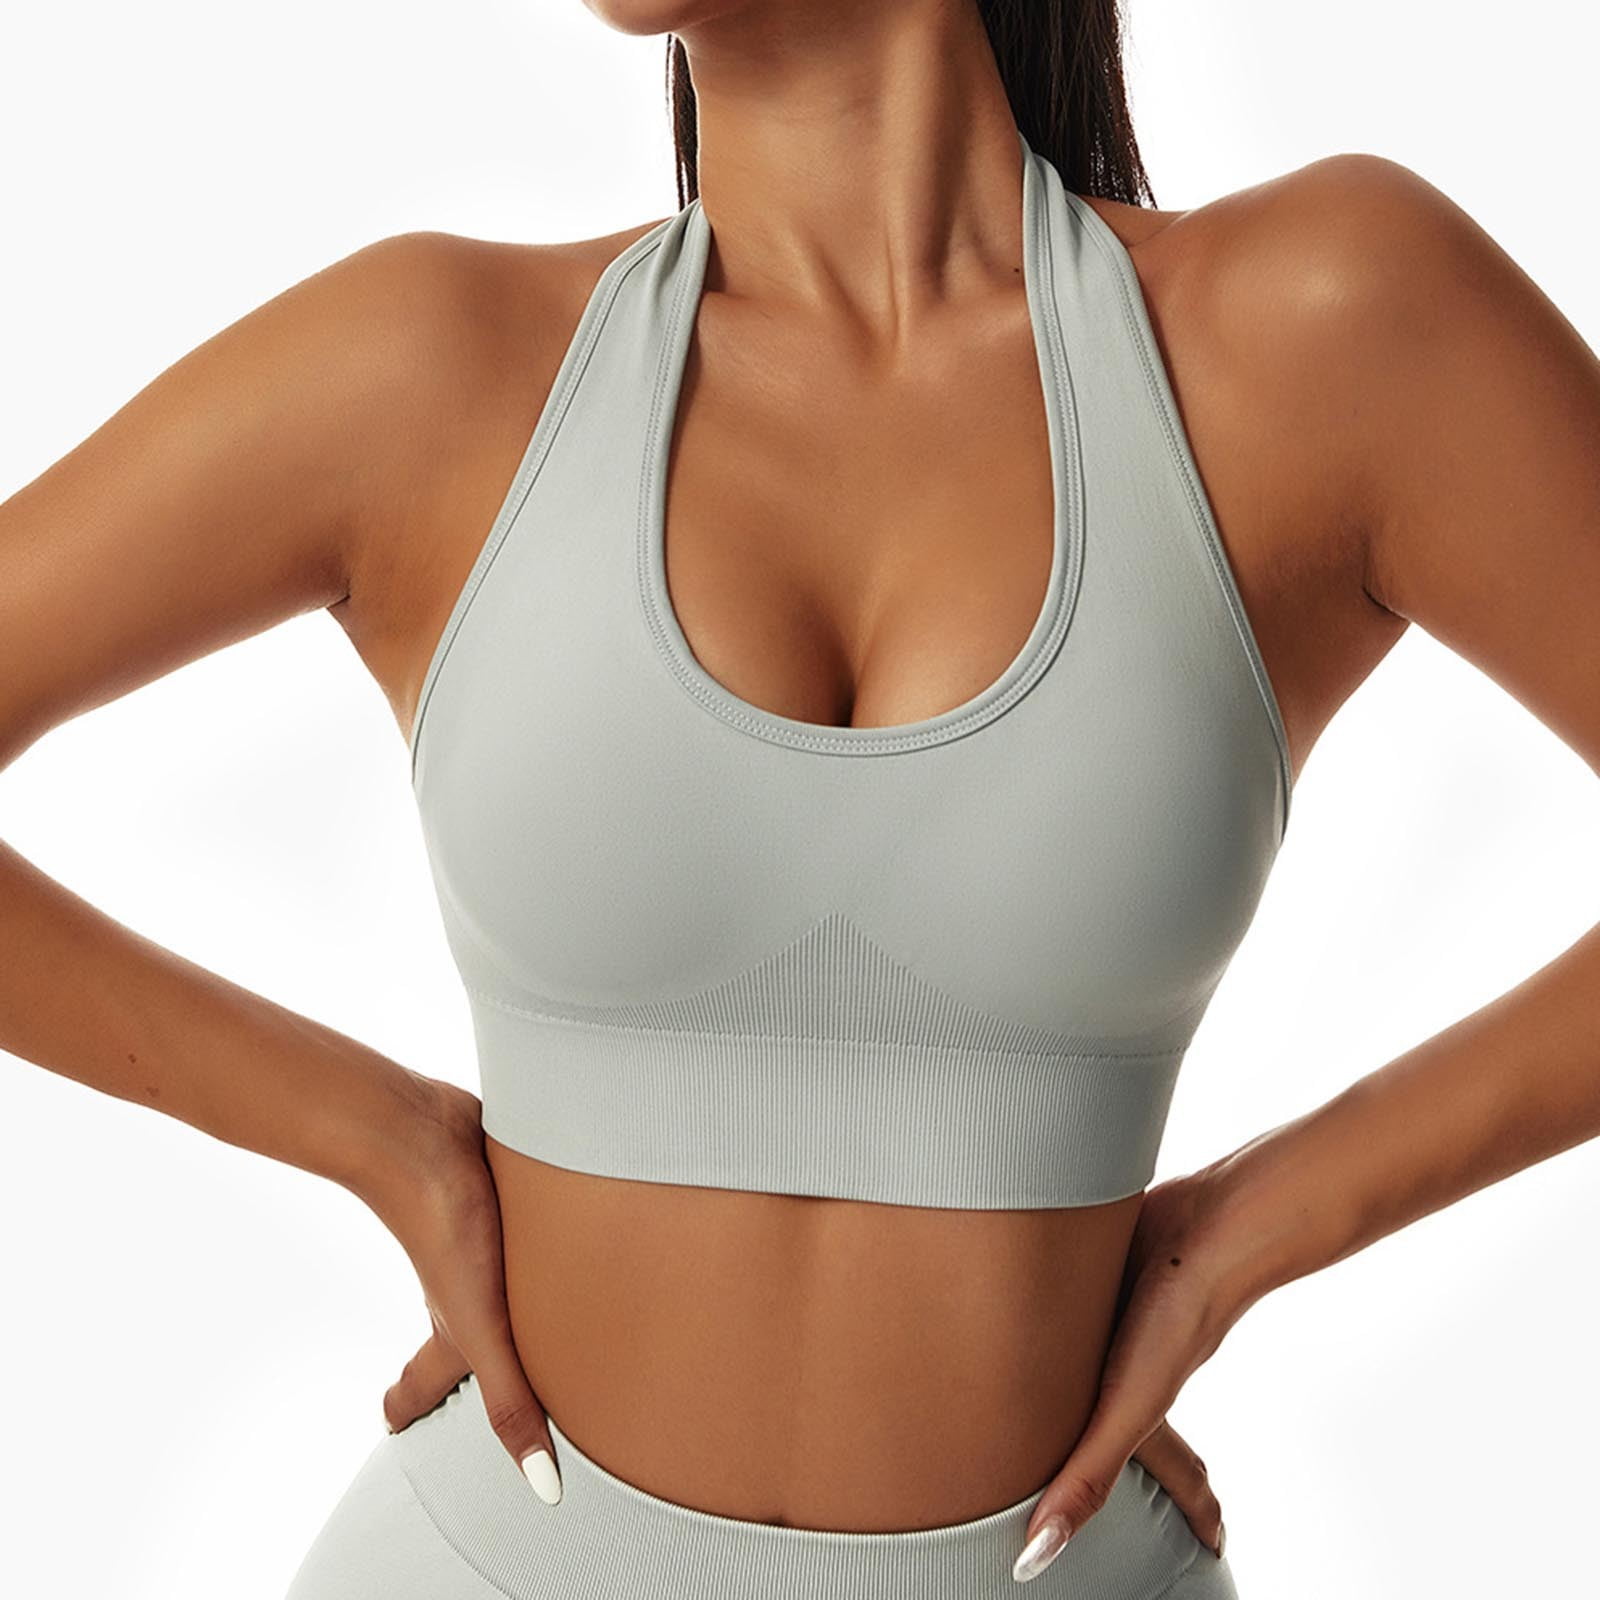 CAICJ98 Lingerie for Women Halterneck Sports Bra Backless Fitness Bustier  Women's Padded Push Up Bra without Underwire Sports Hot Yoga (Grey, XL)